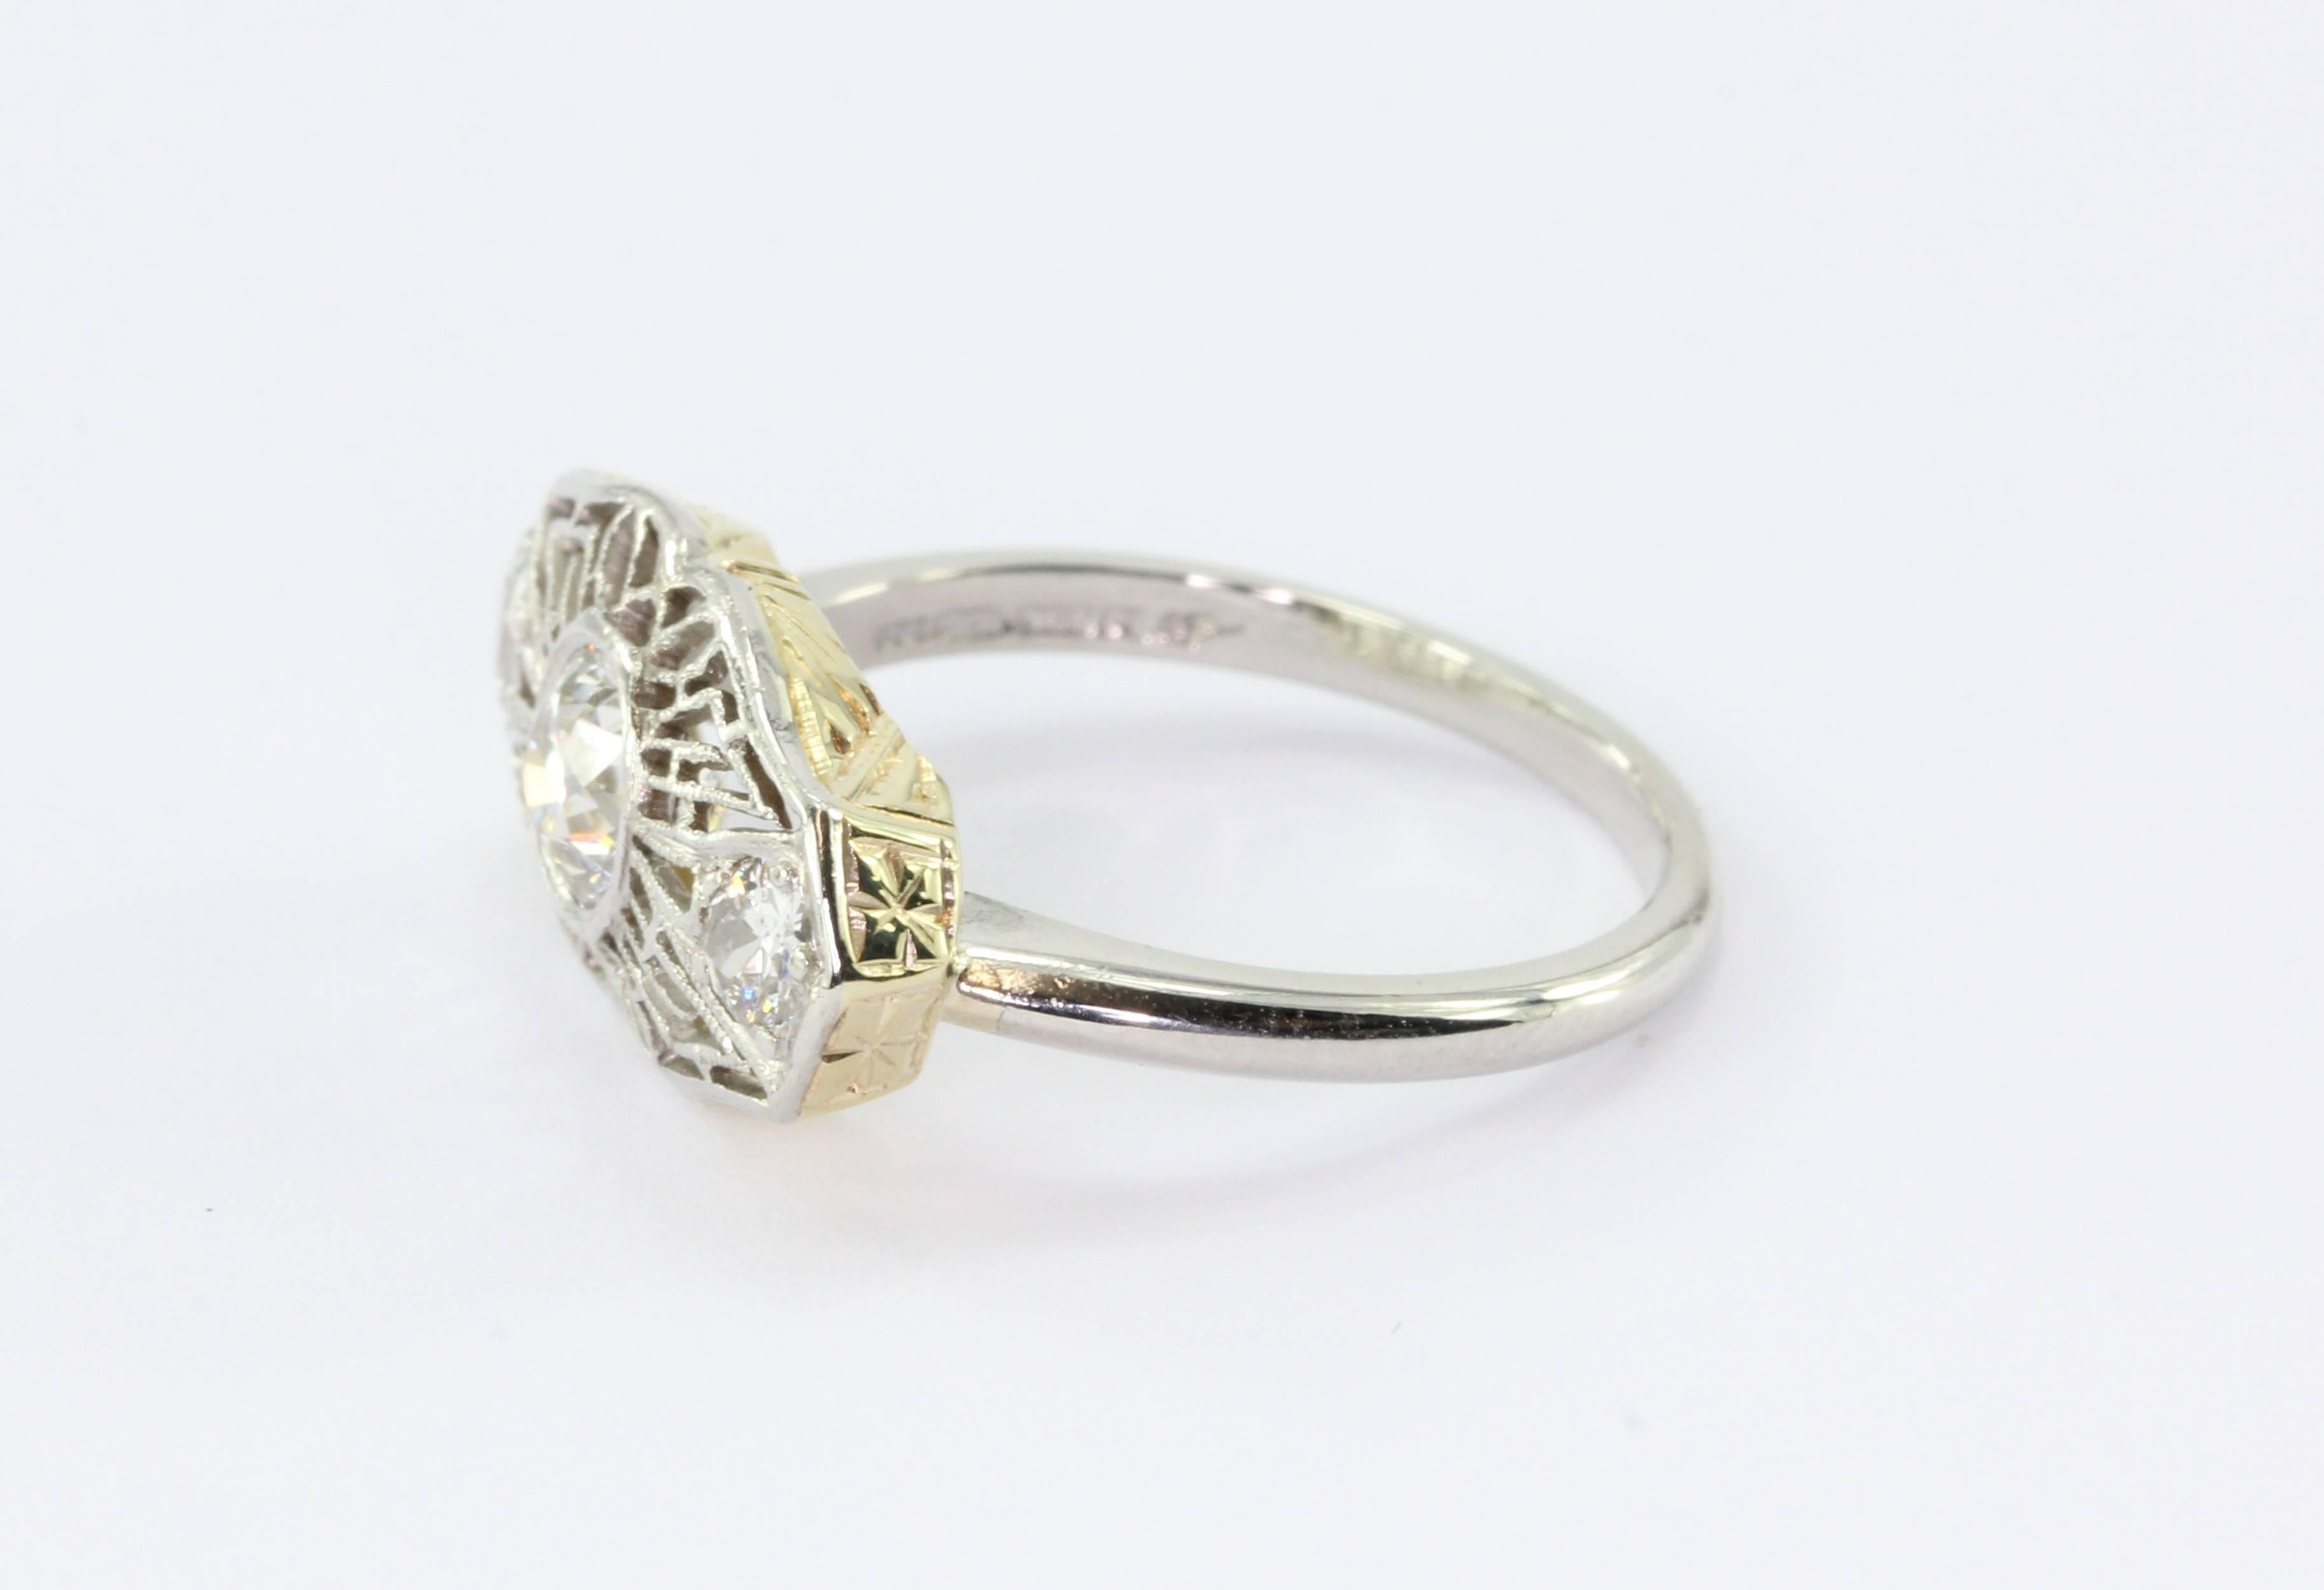 Art Deco Platinum 14K Yellow Gold Old Mine Cut Diamond Stick Pin Conversion Ring. The ring is in excellent estate condition and ready to wear. The ring was originally a stick pin which was professionally converted into a ring using the pin top and